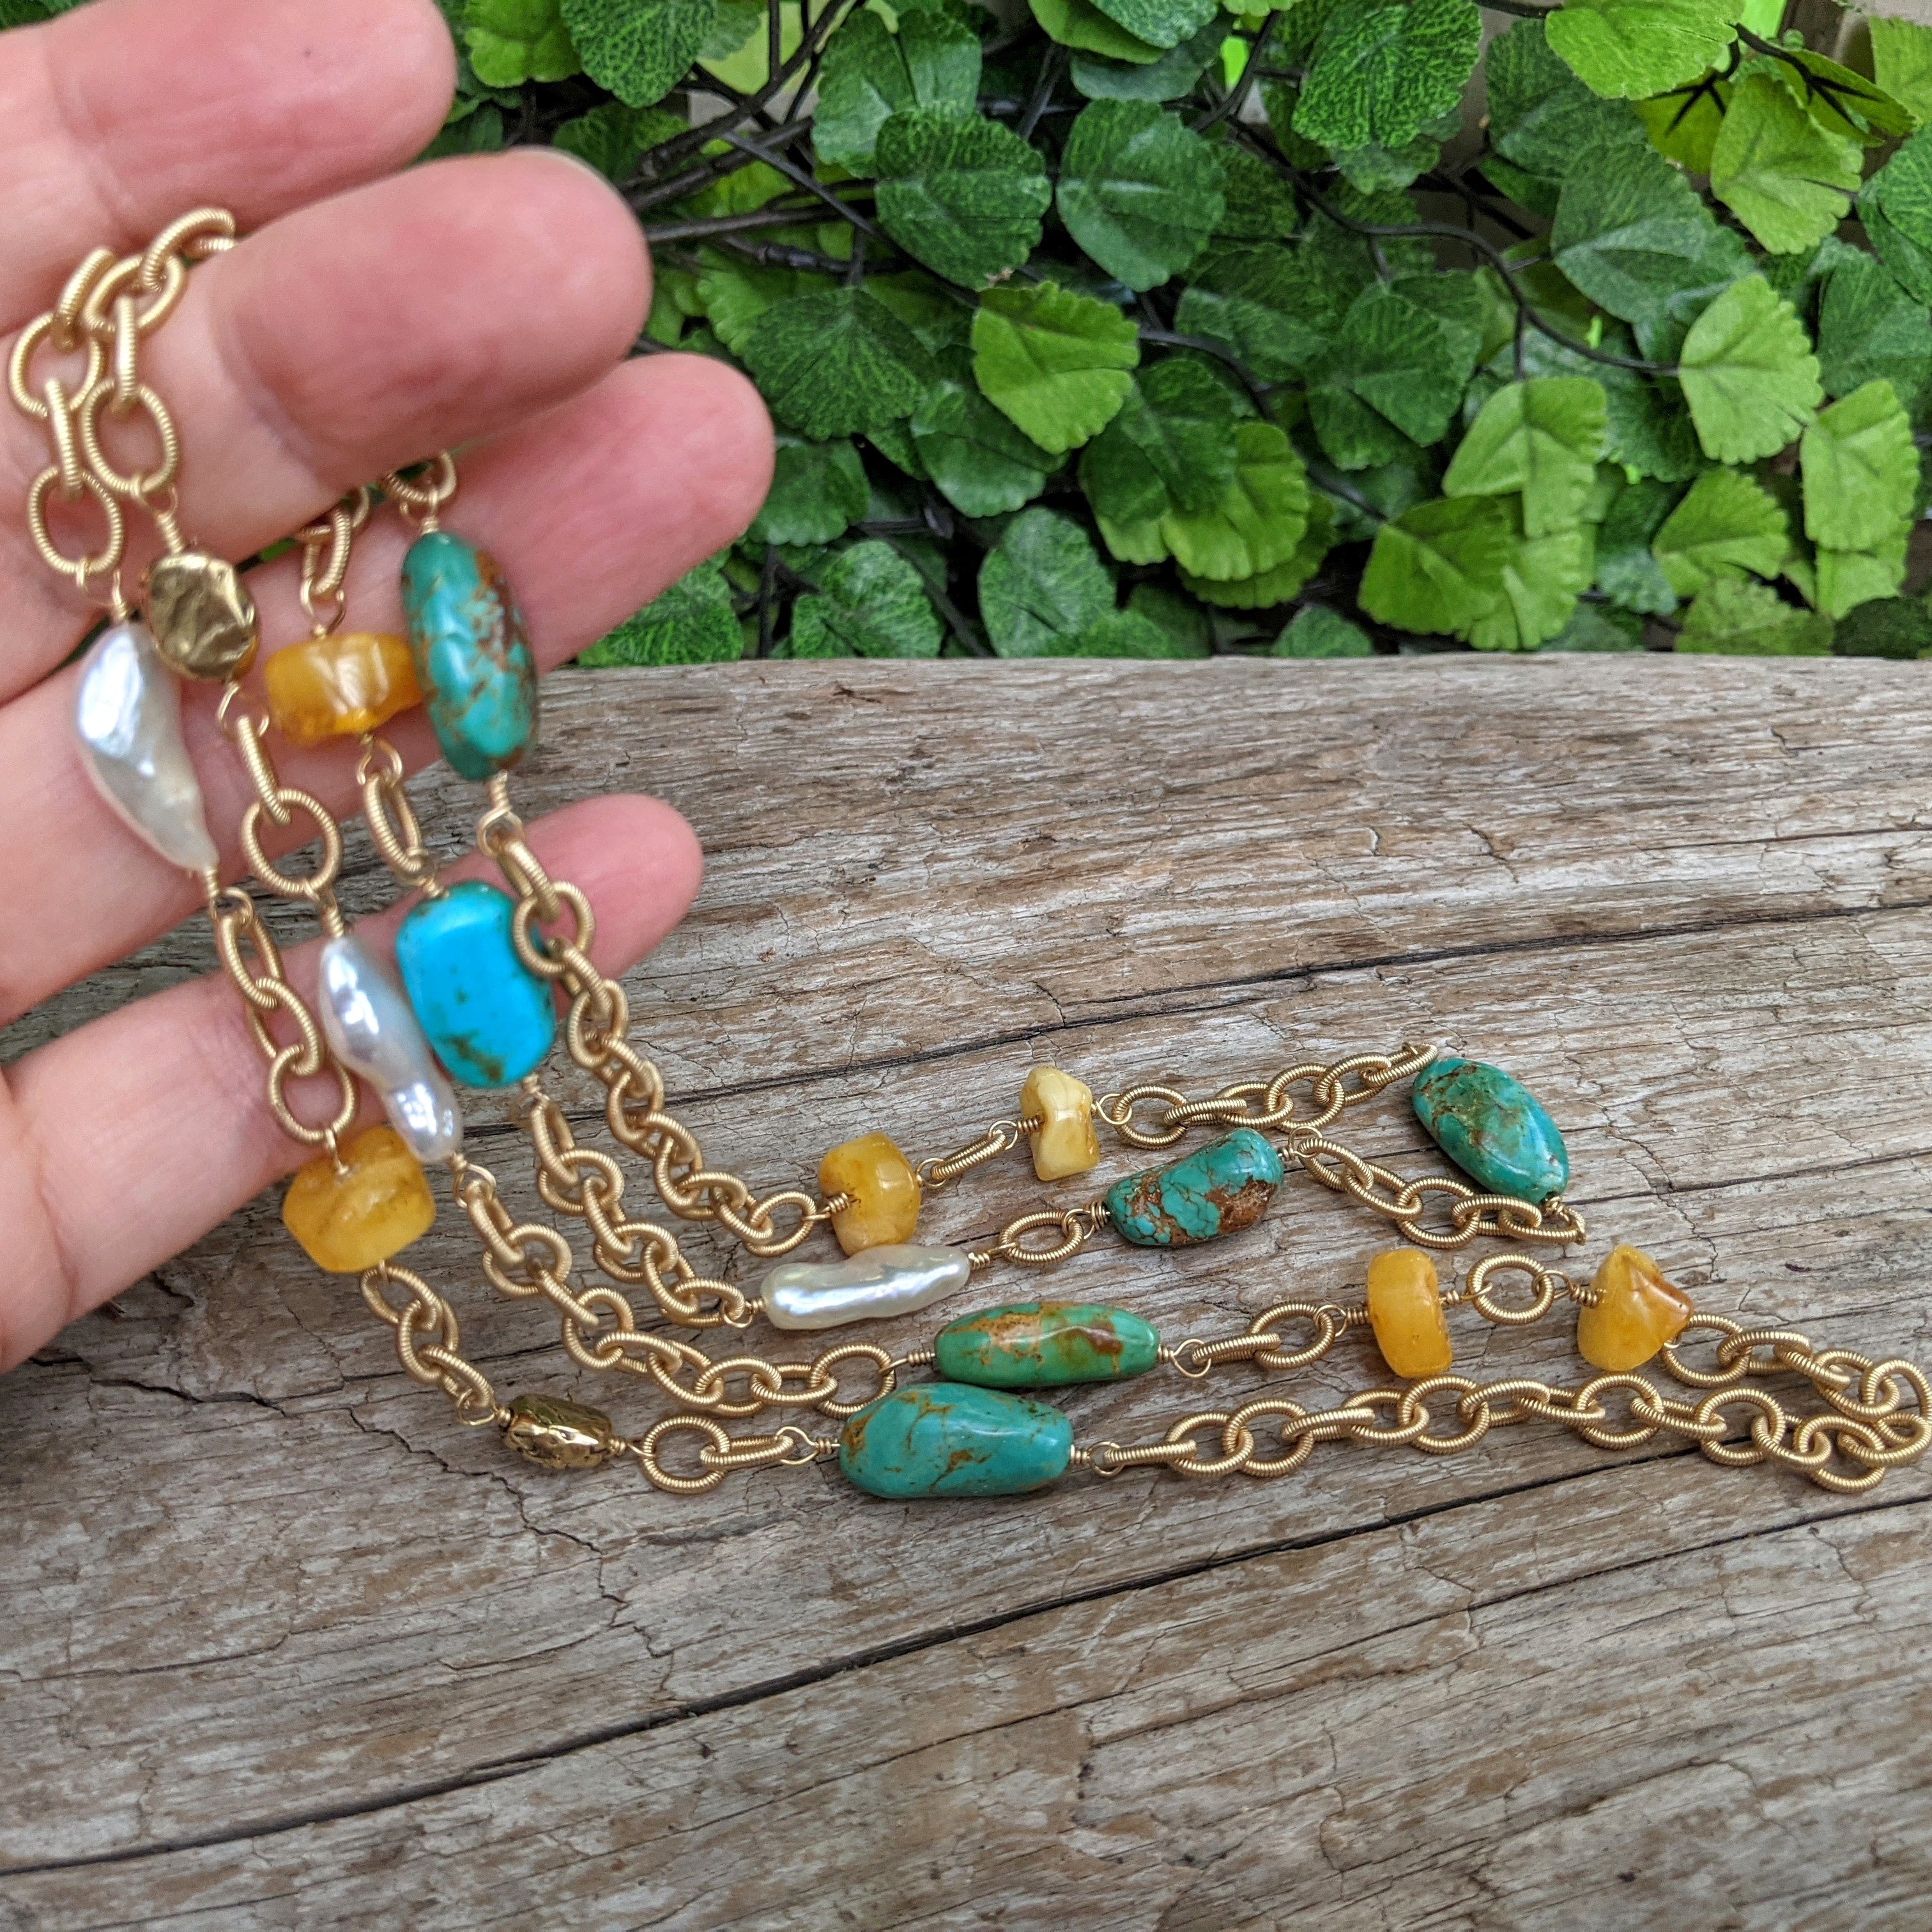 Turquoise, pearl, amber long chain necklace. Artistic necklace. Organic necklace handcrafted by Aurora Creative Jewellery.